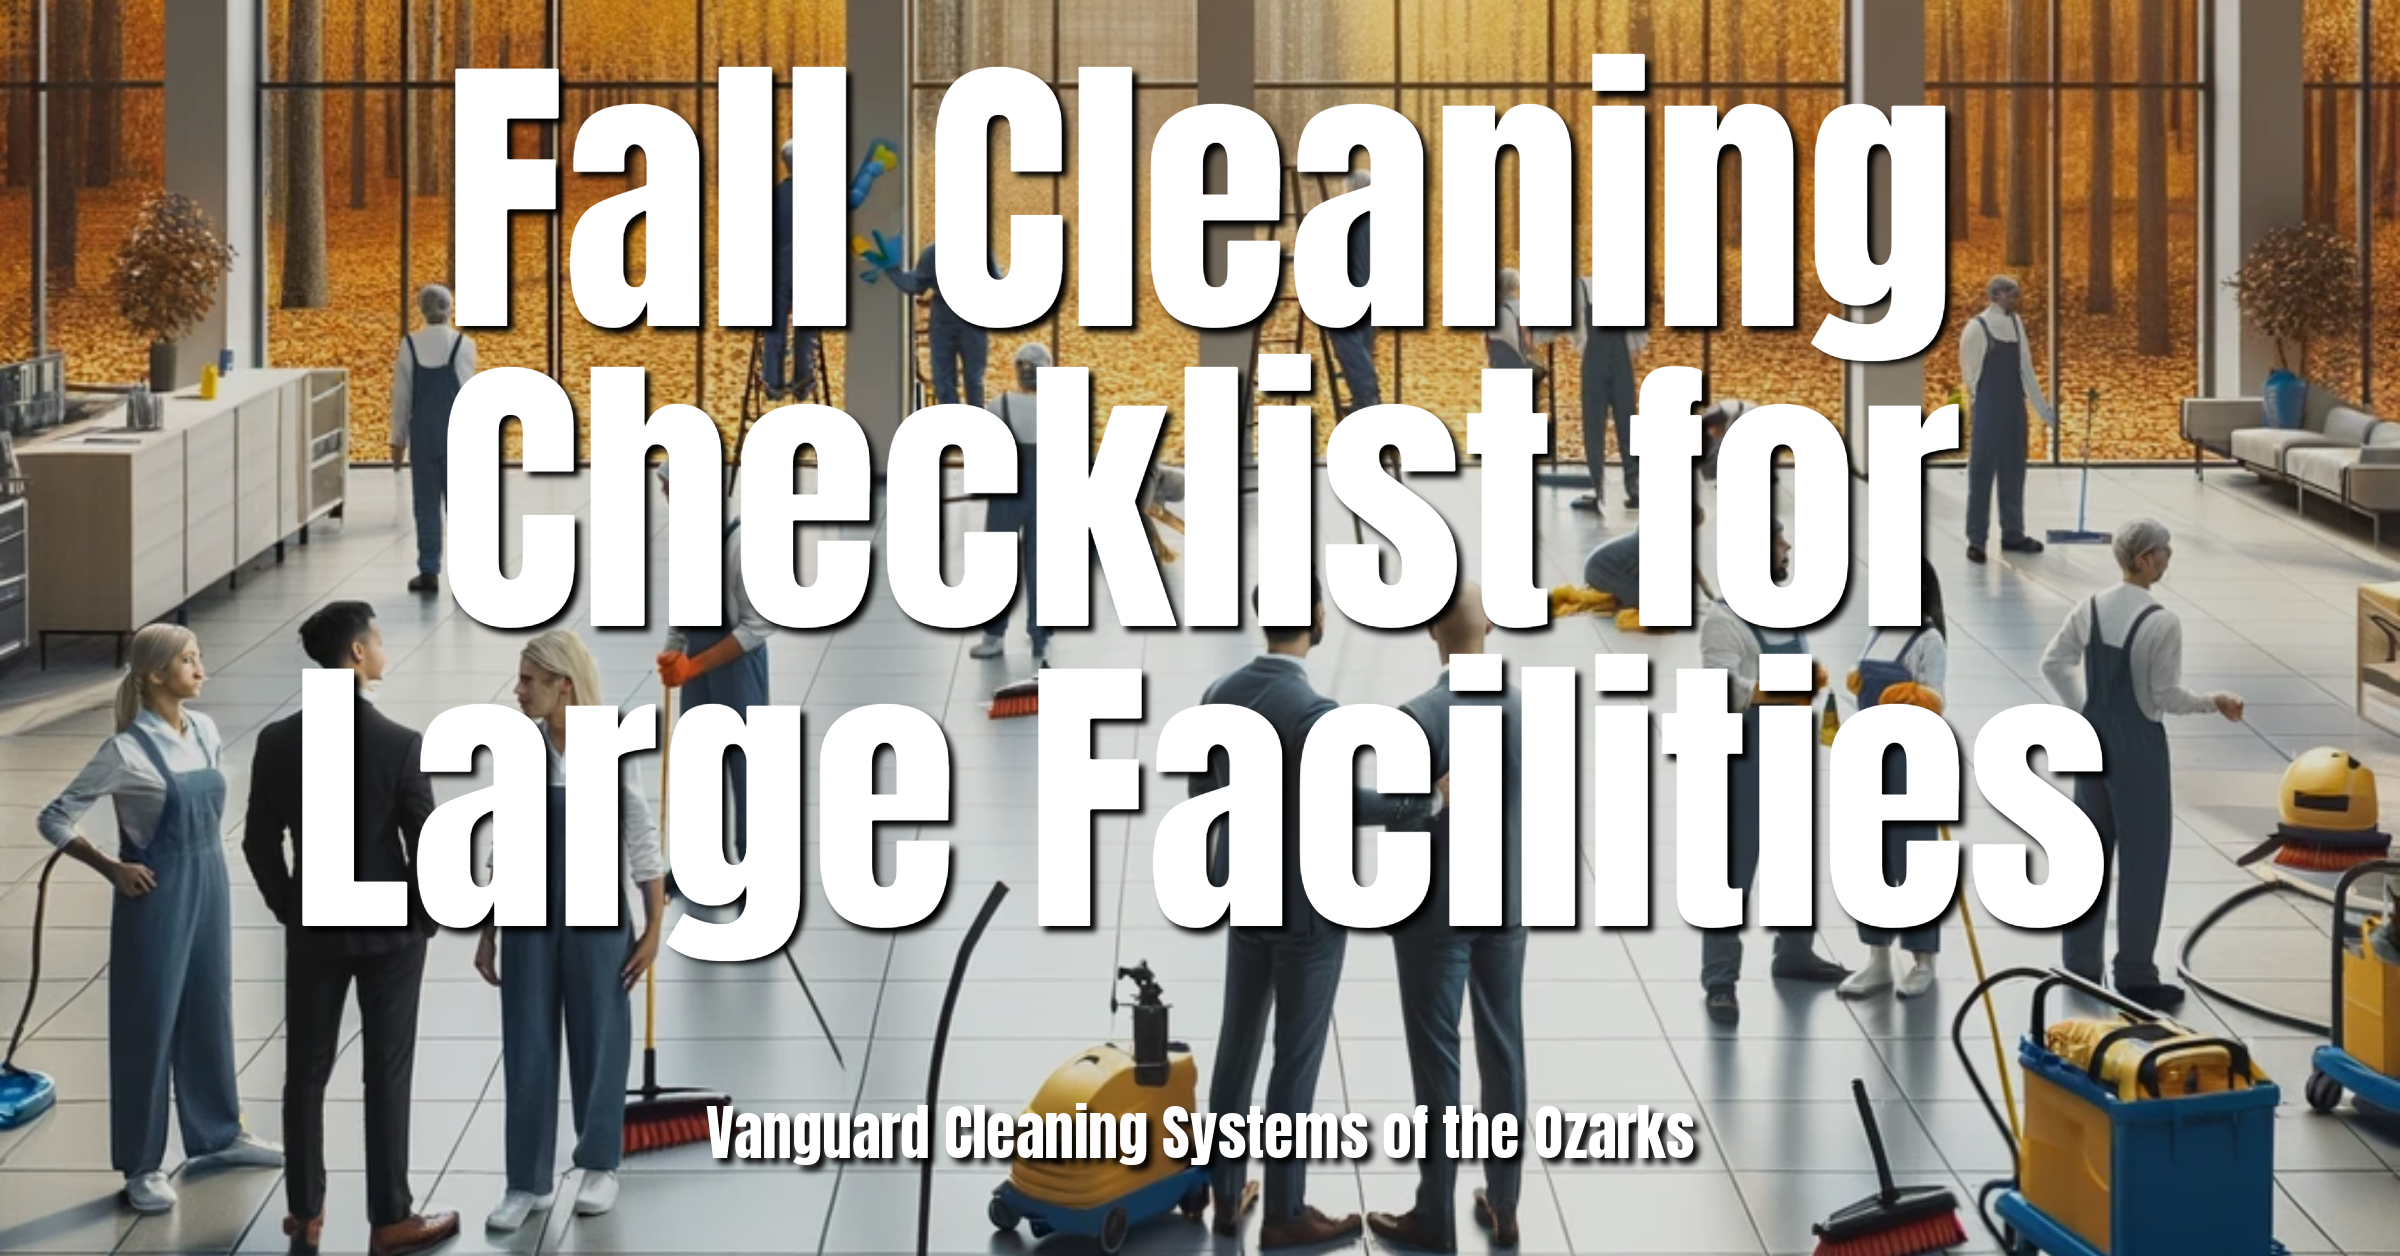 Industrial Cleaning: Pressure Washing Large Facilities